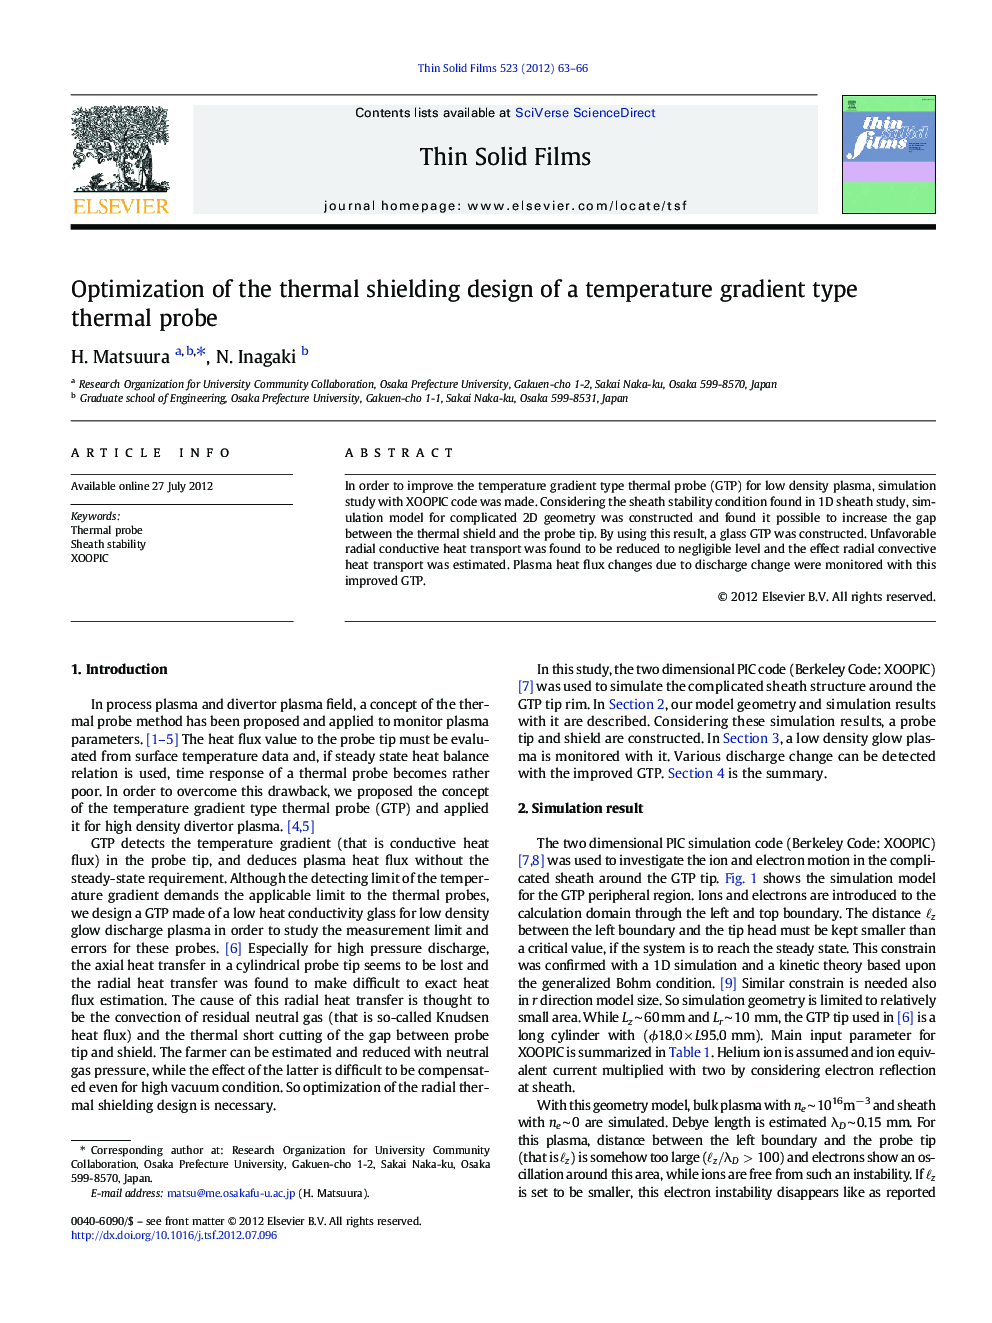 Optimization of the thermal shielding design of a temperature gradient type thermal probe